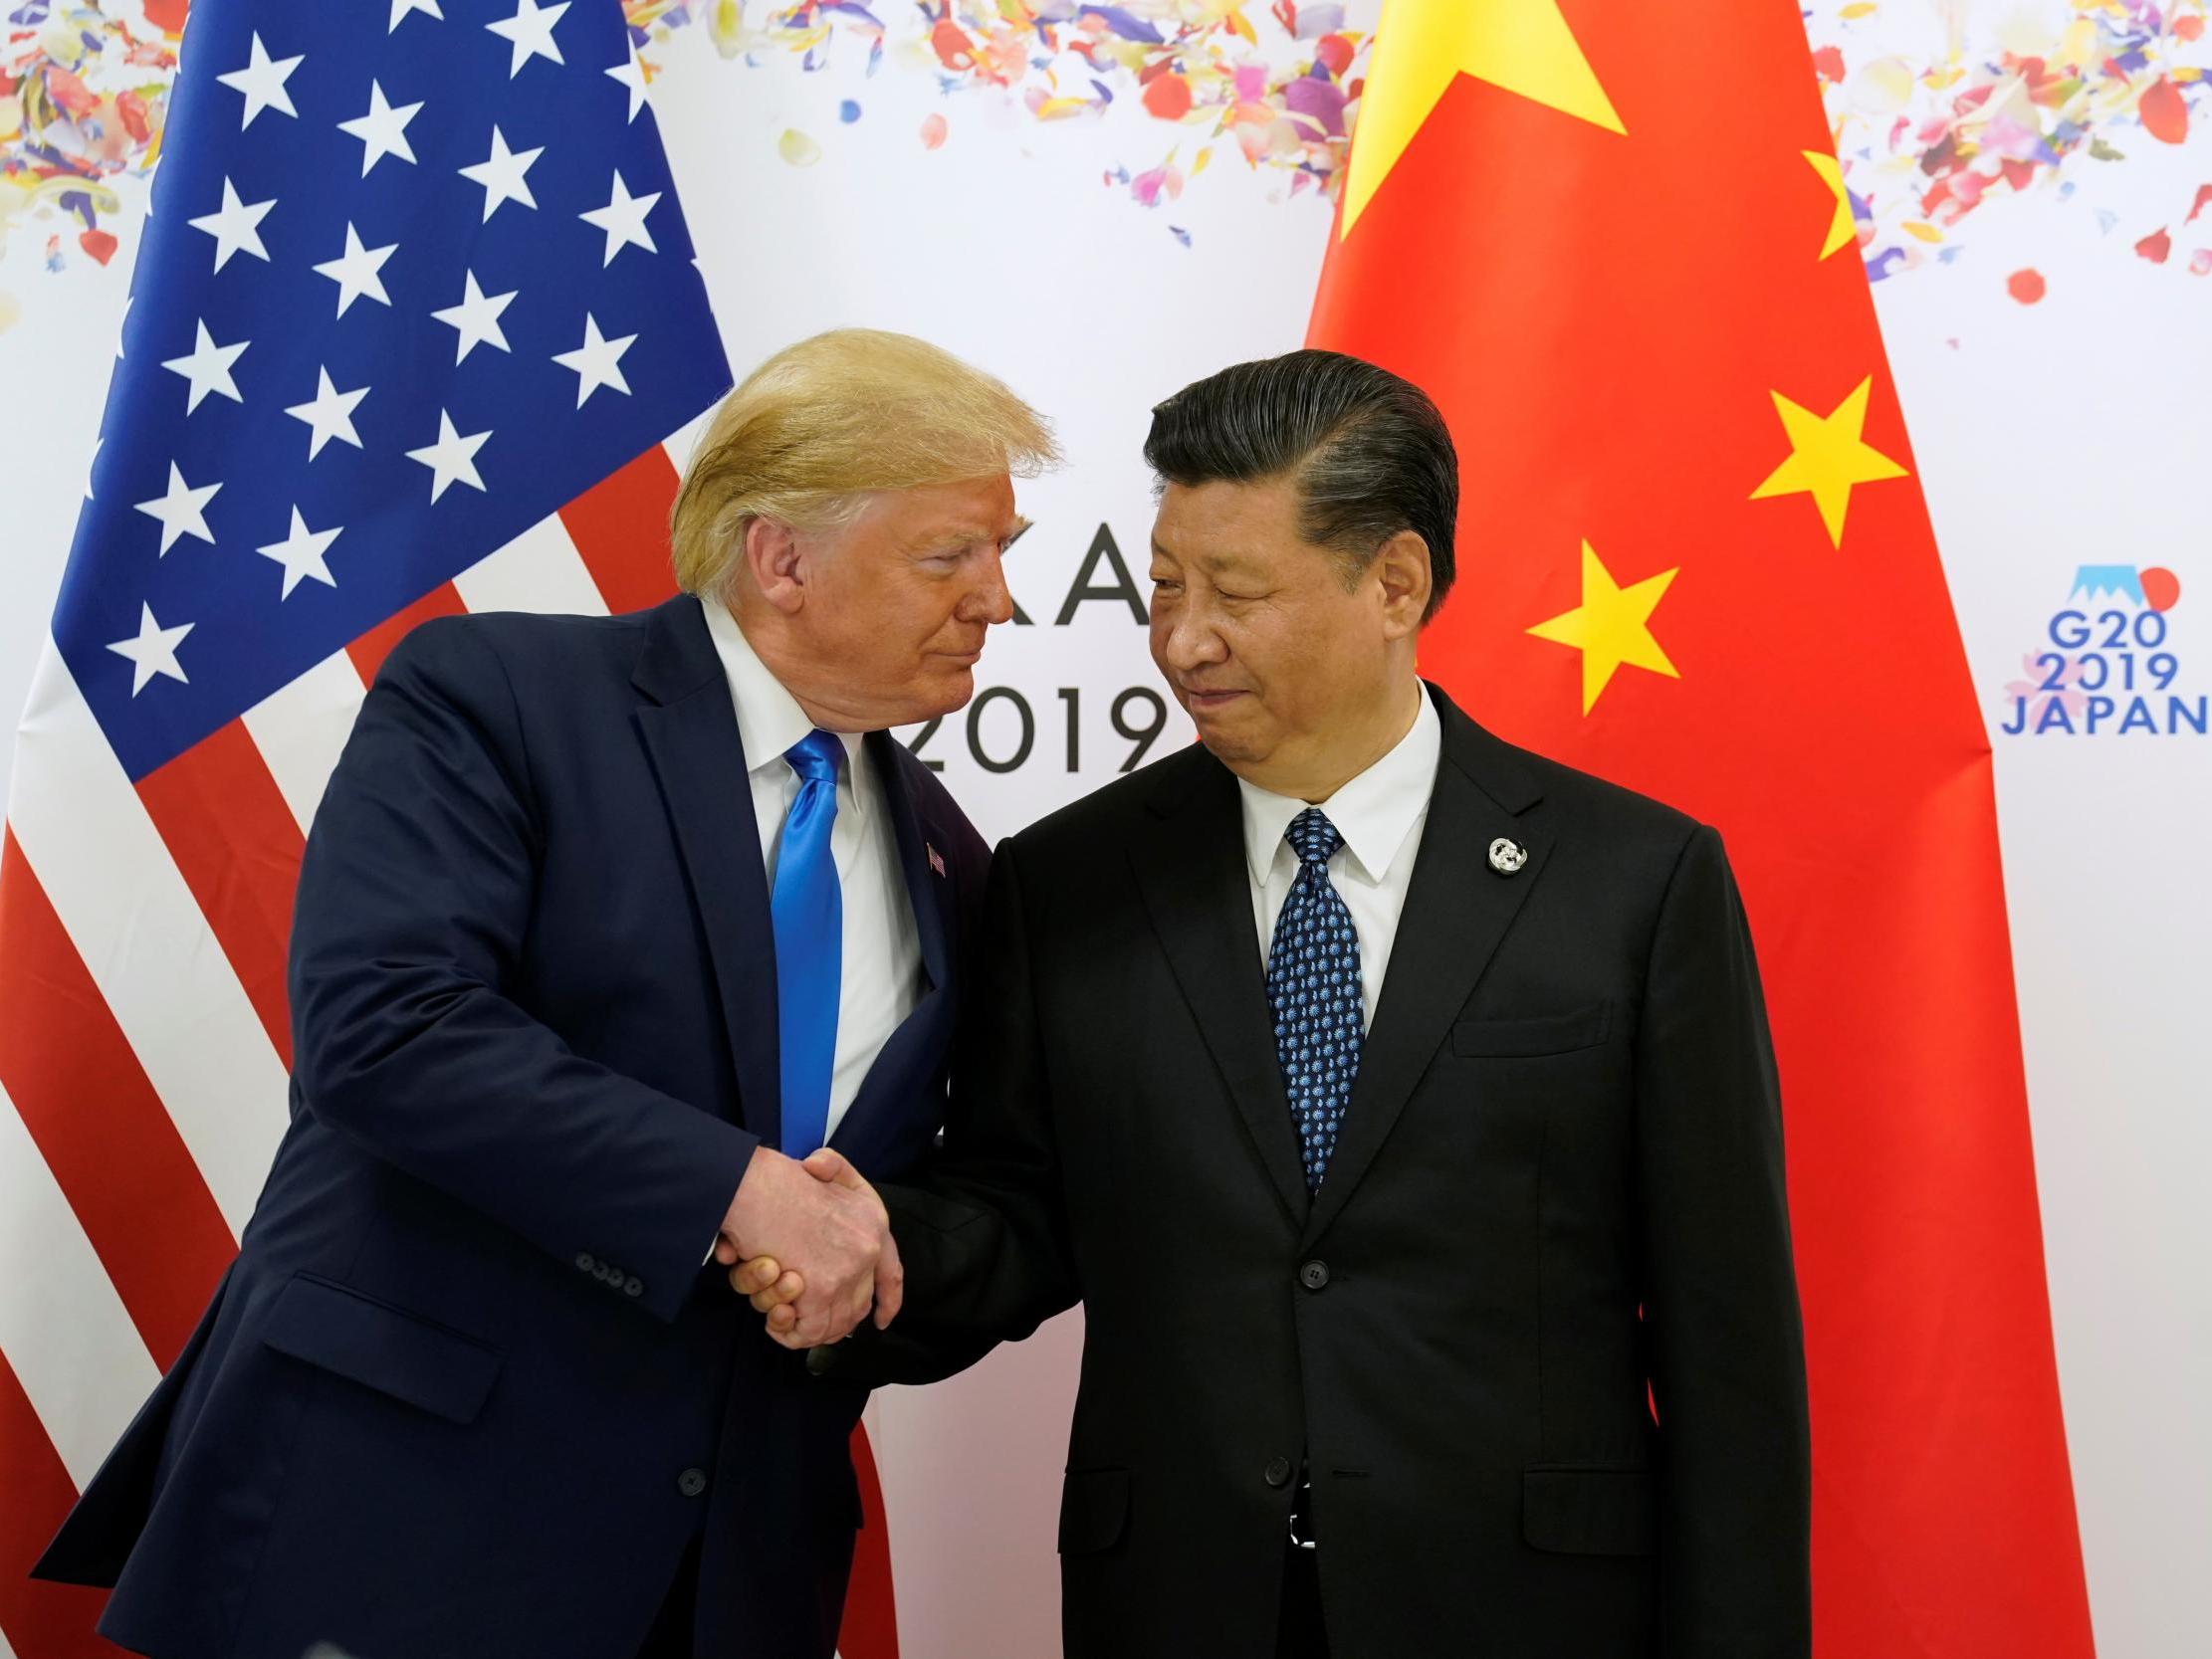 Donald Trump shakes hands with China's President Xi Jinping before starting their bilateral meeting during the G20 leaders summit in Osaka, Japan in June 2019